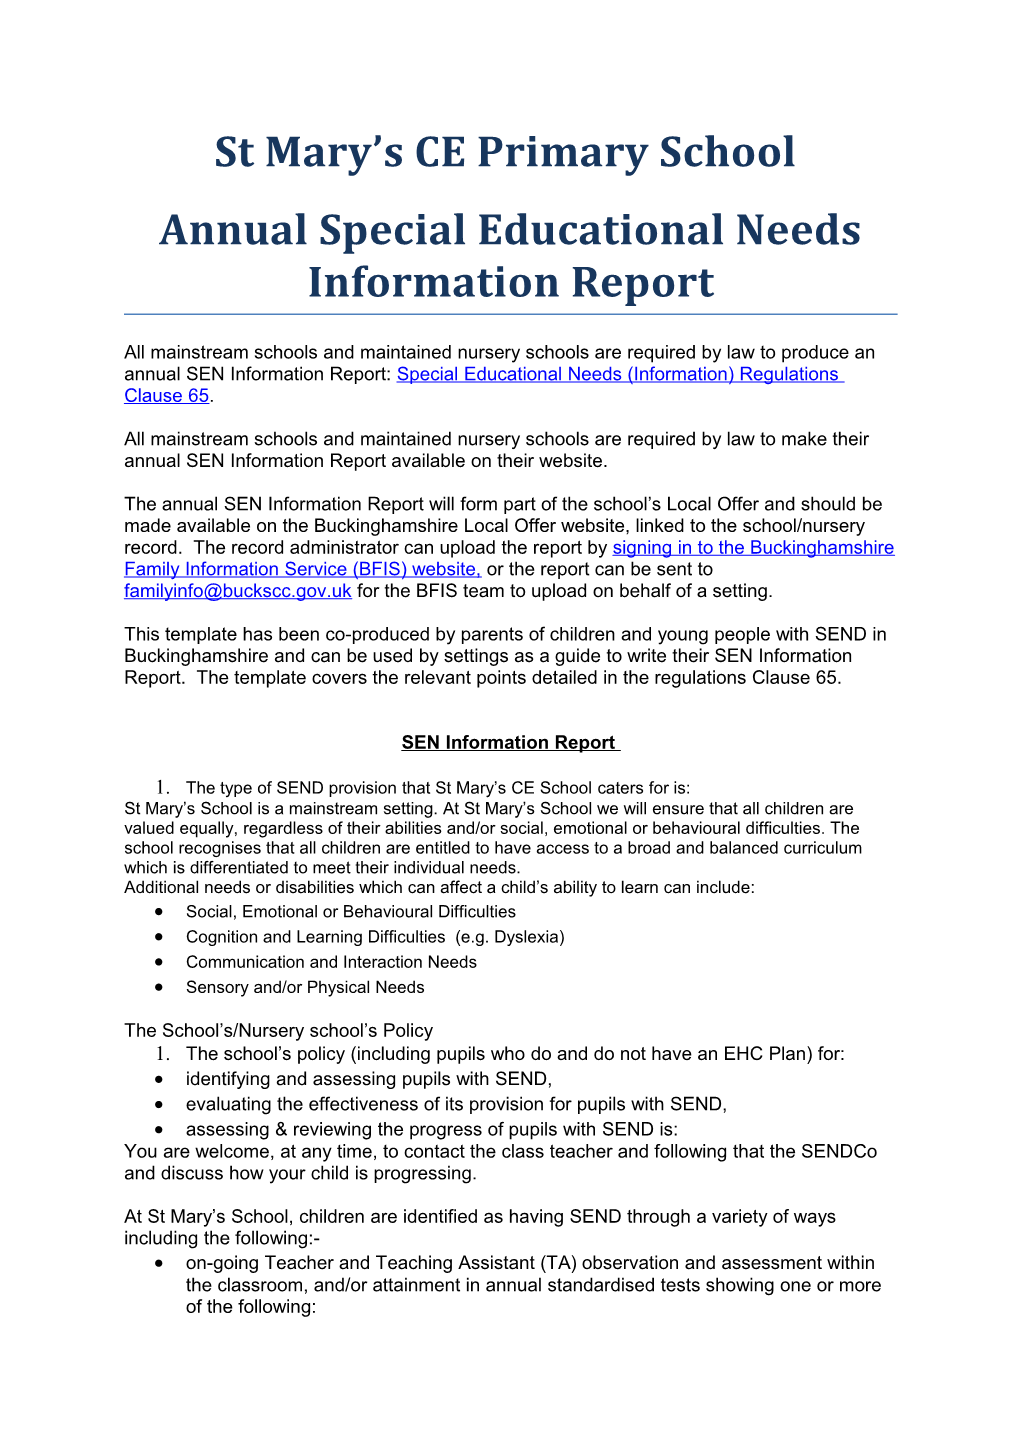 Annual Special Educational Needs Information Report